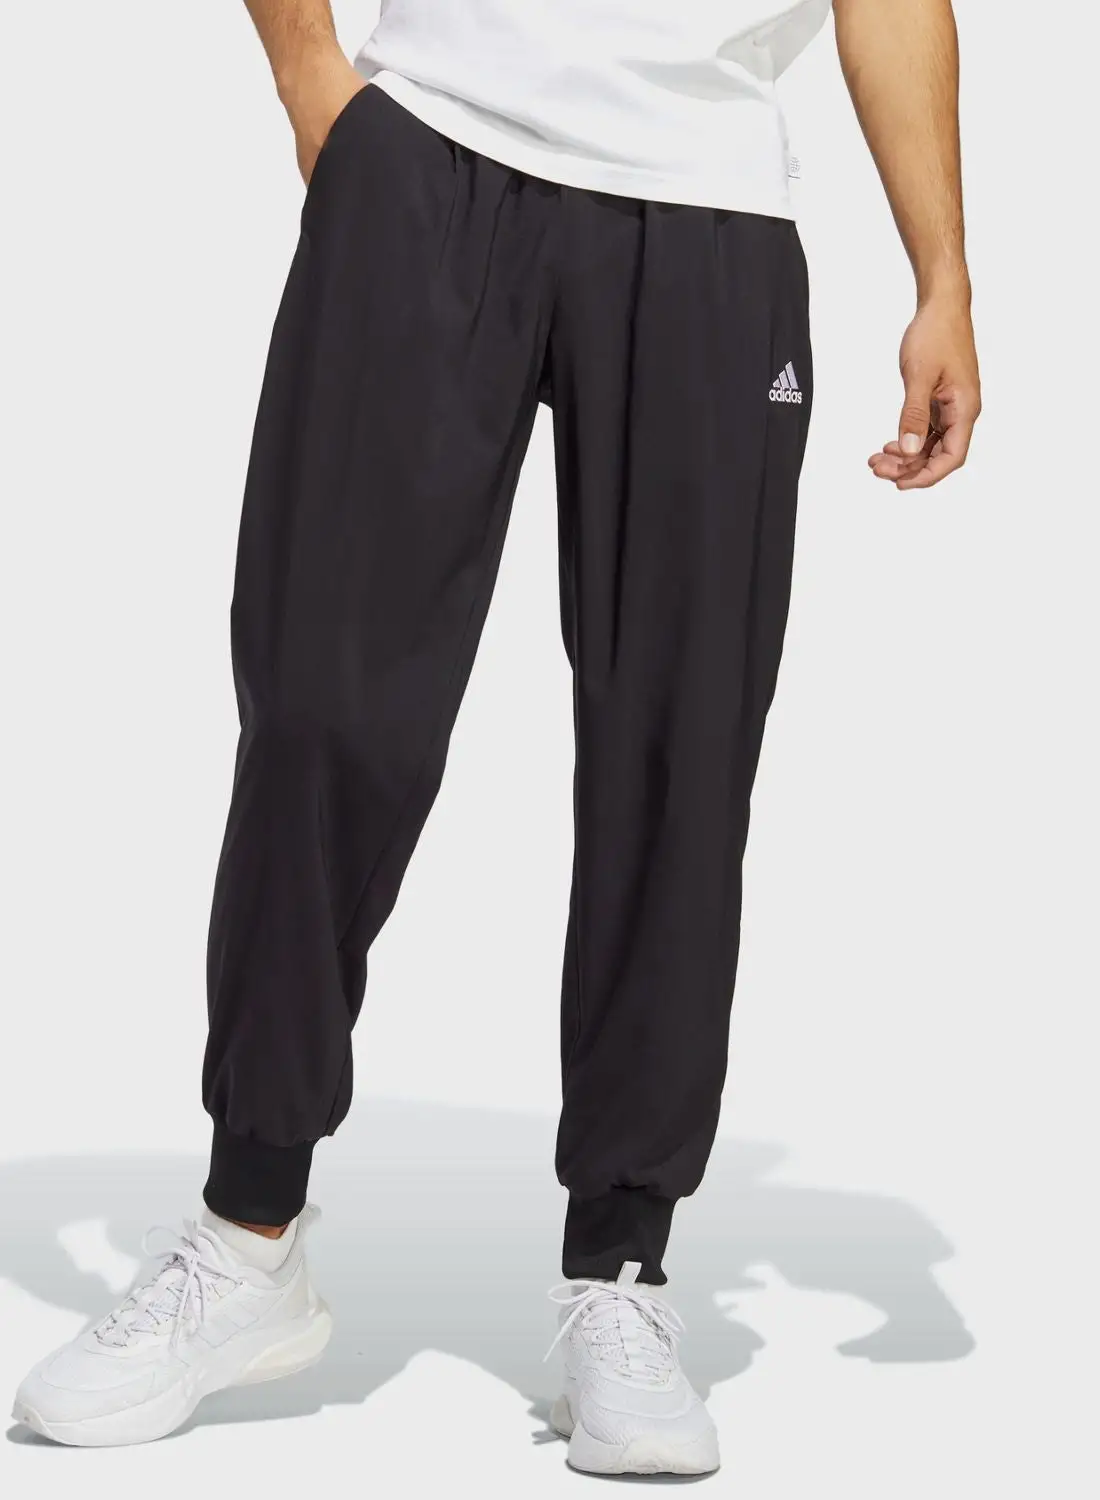 Adidas Stanford Tapered Cuff Pants